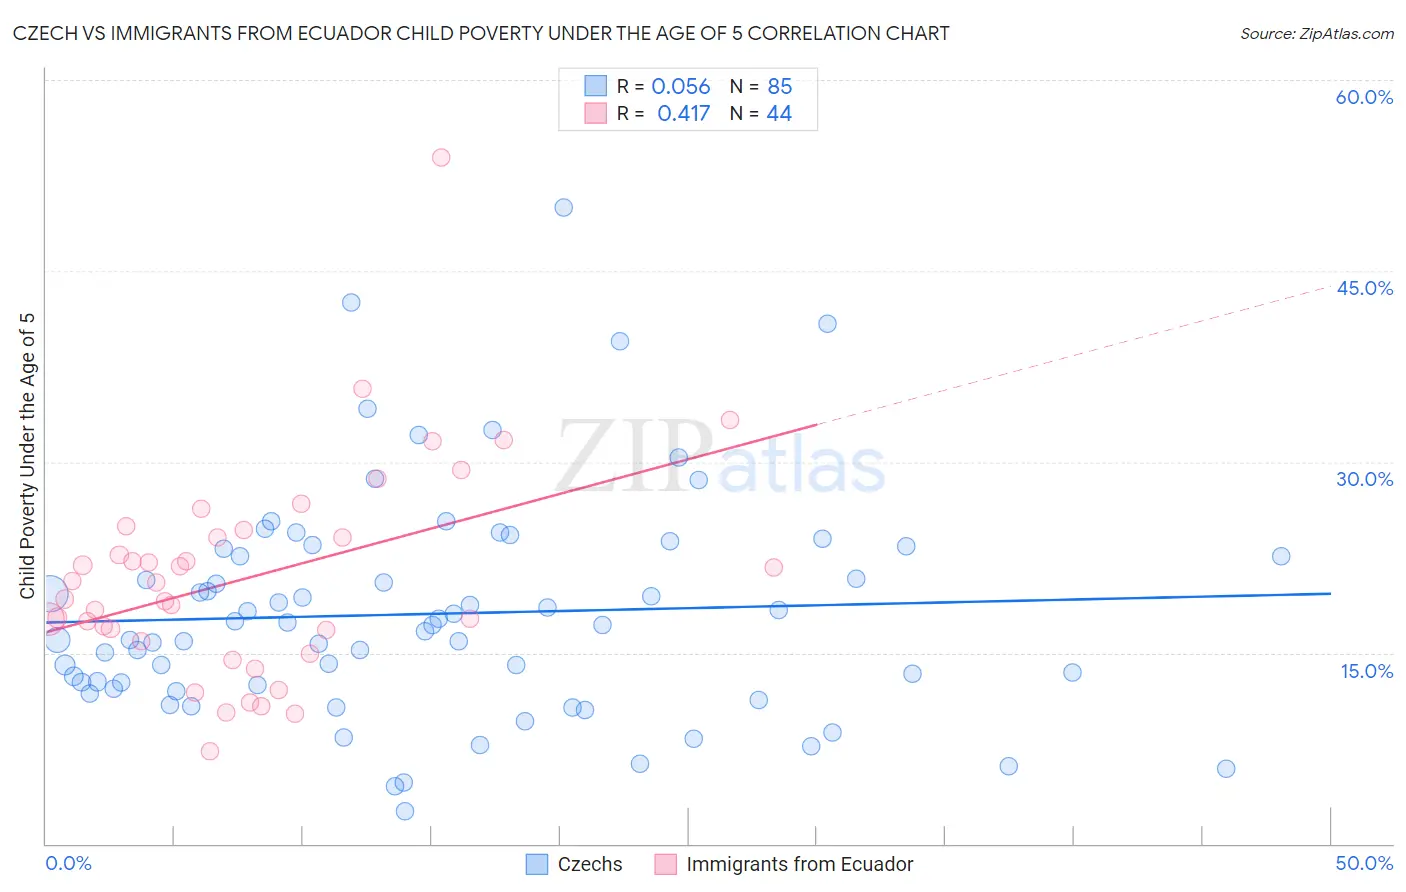 Czech vs Immigrants from Ecuador Child Poverty Under the Age of 5